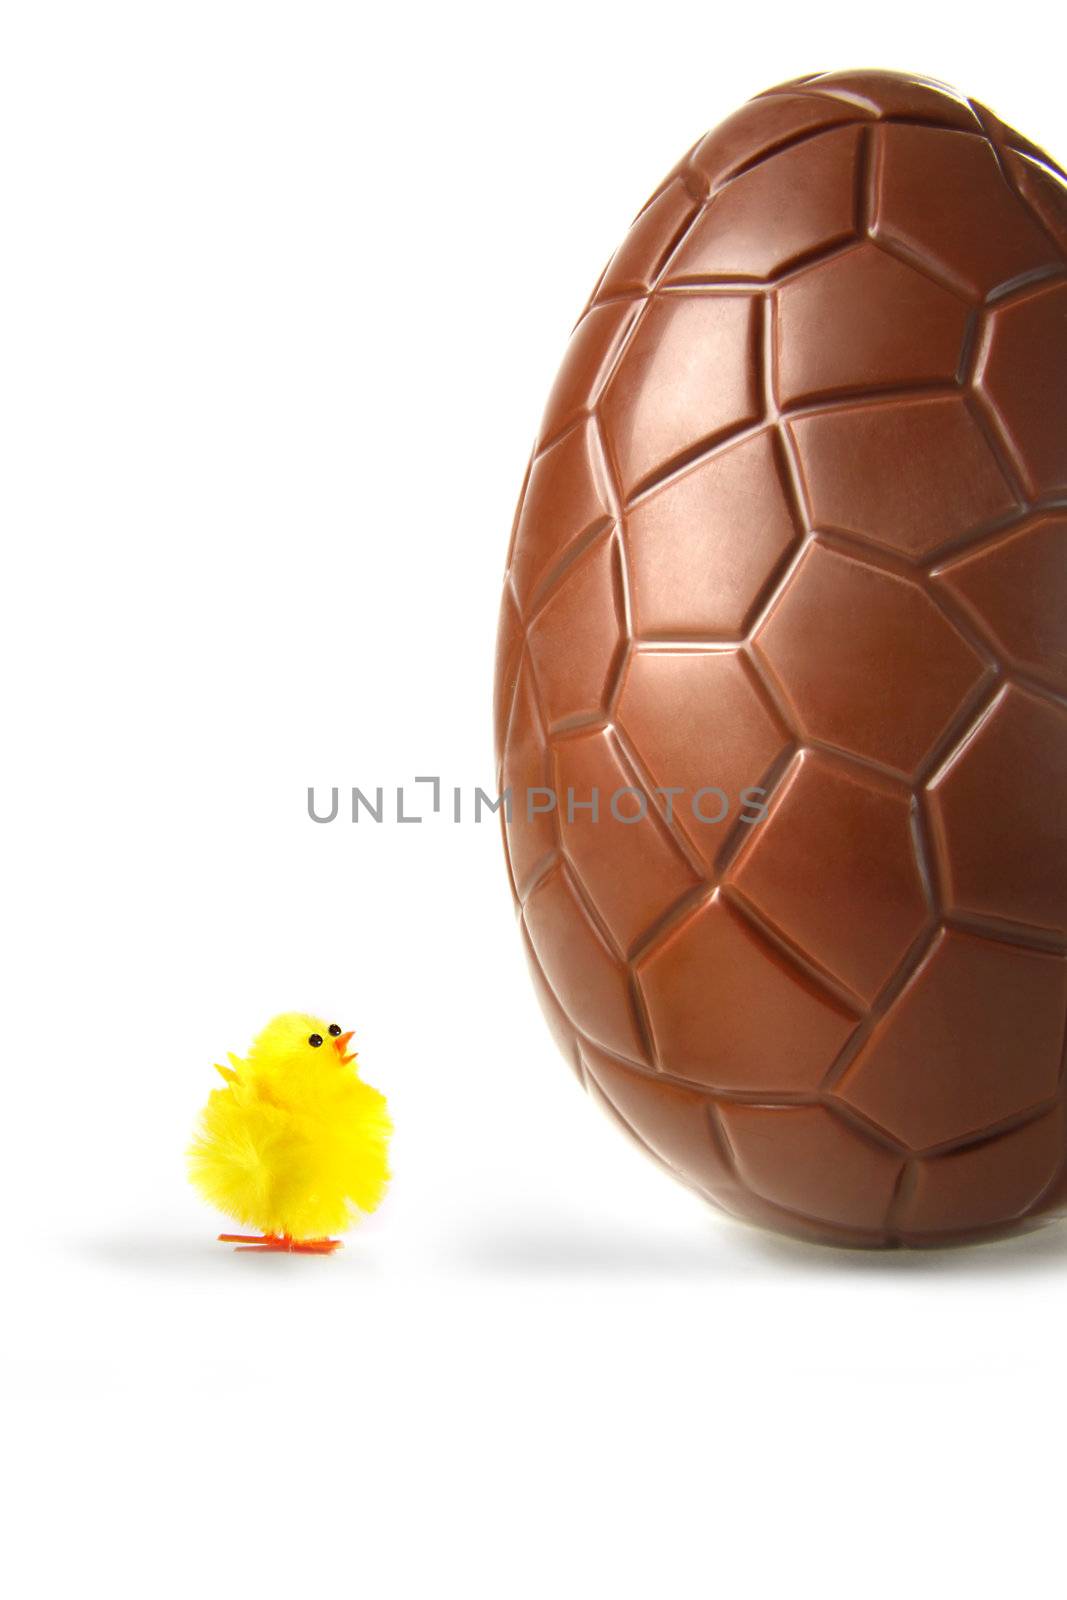 Little easter chick looking up at big chocolate egg